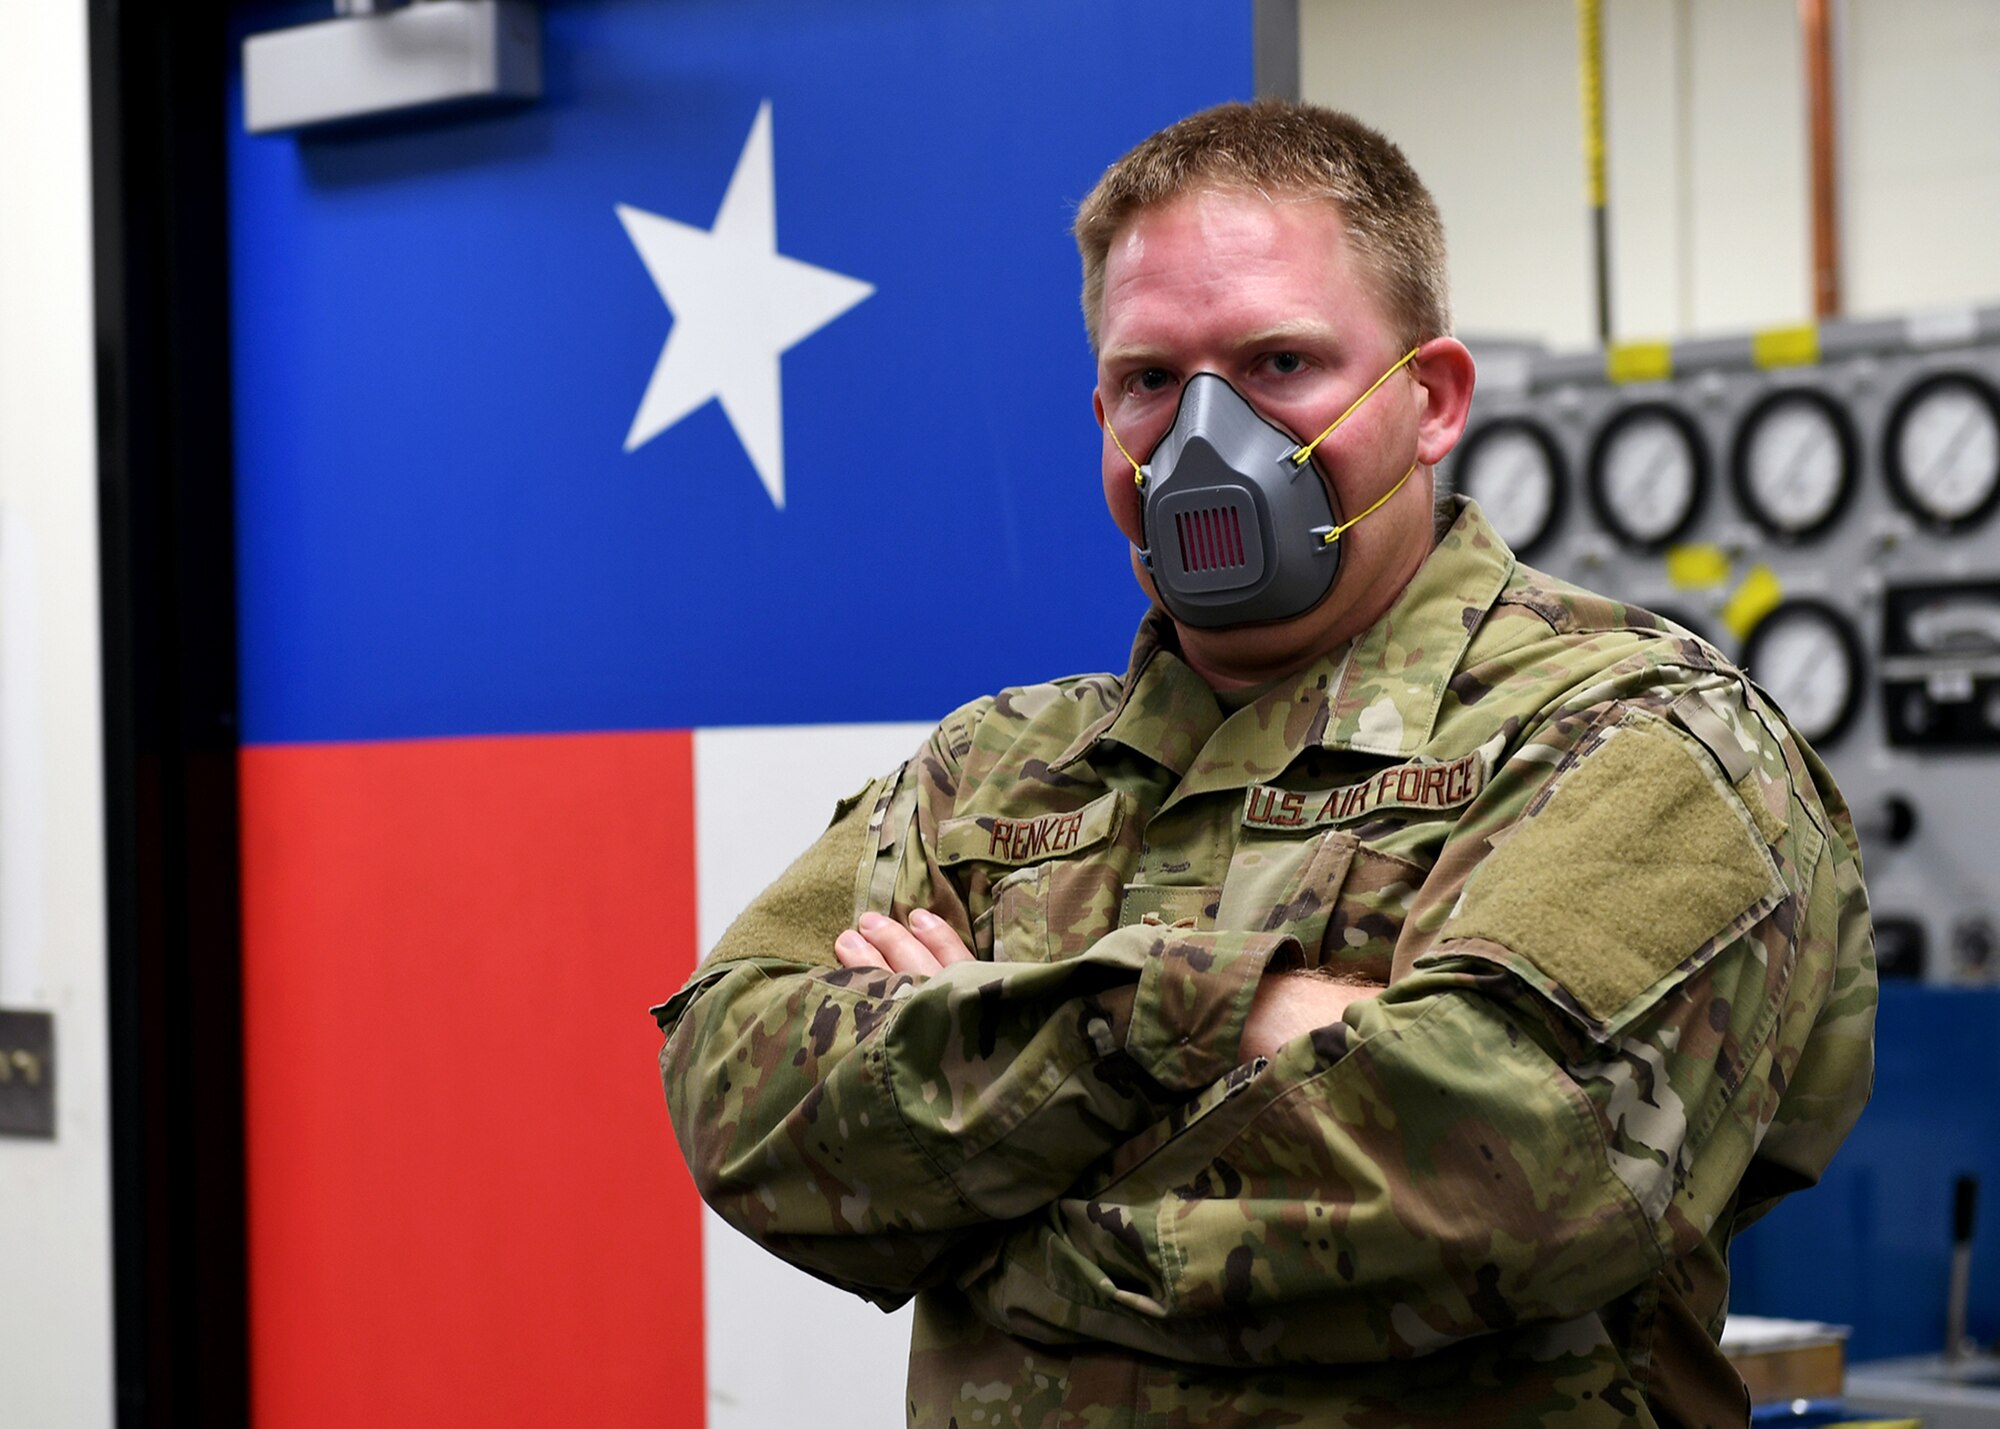 Staff Sgt. Paul Renker, 149th Maintenance Squadron hydraulics technician, wears a mask he made on his personal 3D printer for people in his unit who might need one after initial guidance came out about use and wear for Air Force personnel. (Air National Guard photo by Mindy Bloem)